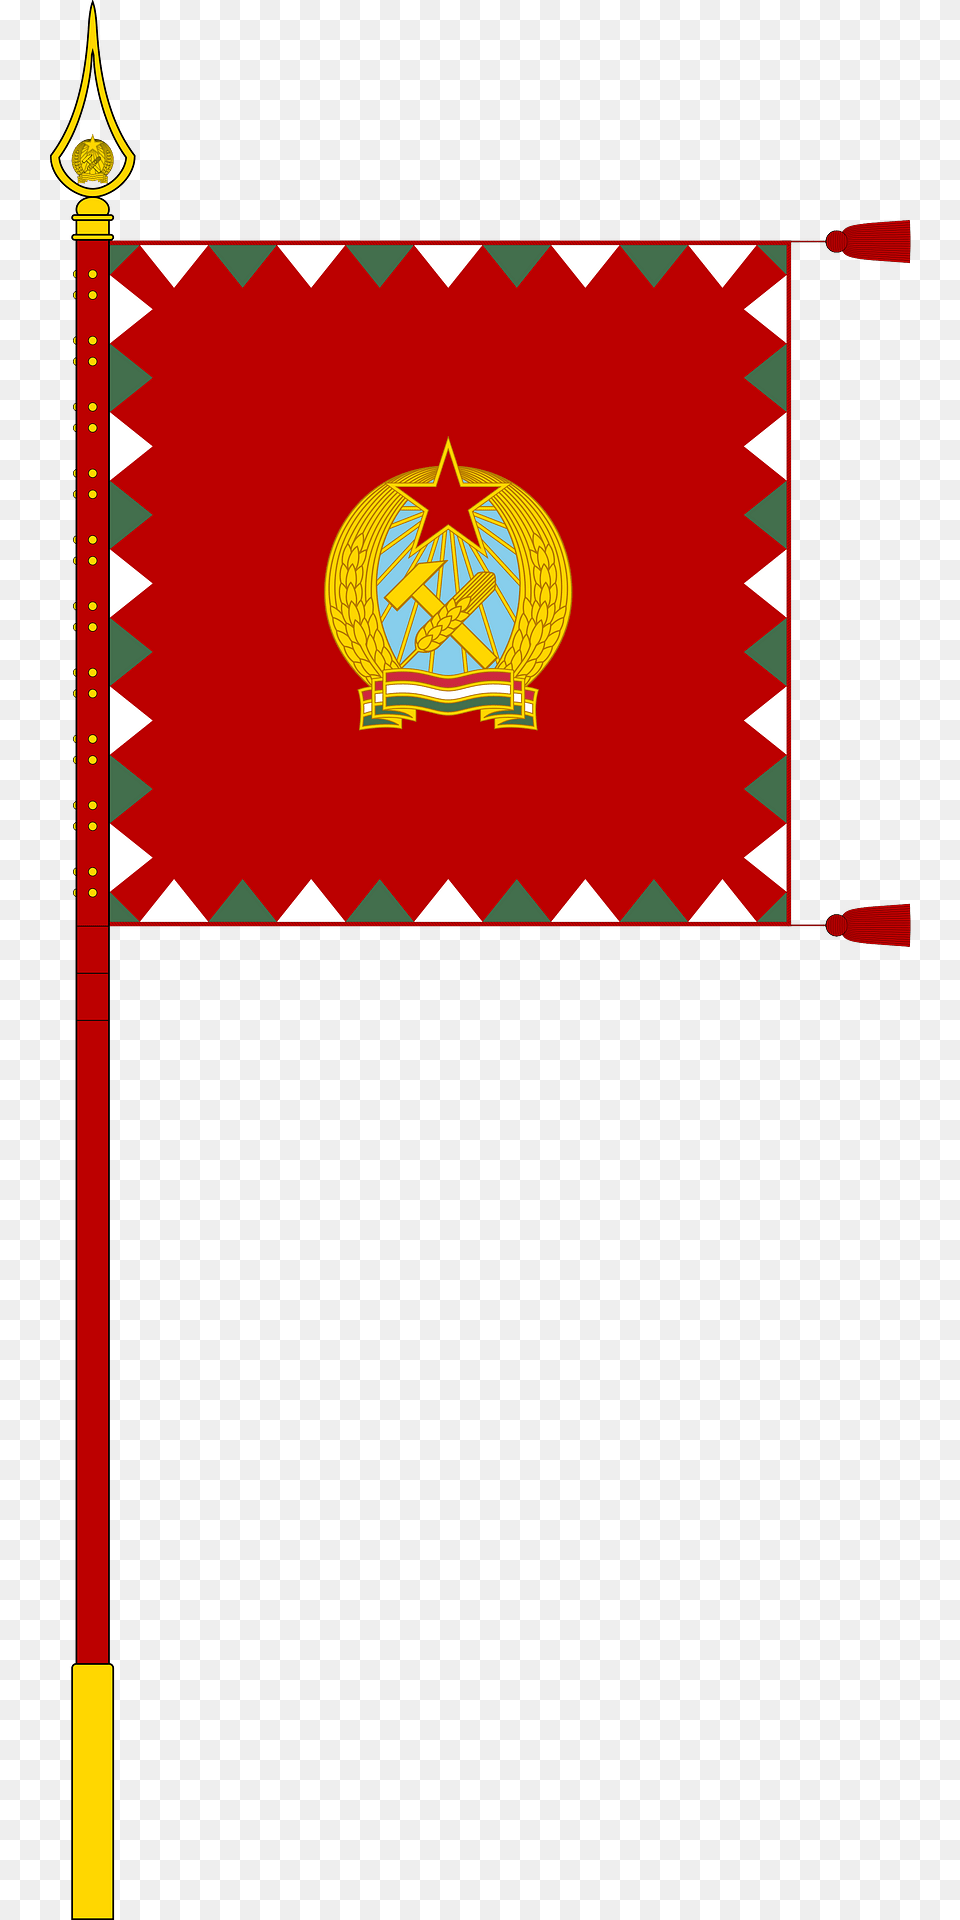 Standard For Motorised Rifle Regiments Of The Hungarian People39s Army 1950 1957 With Staff Clipart Free Png Download